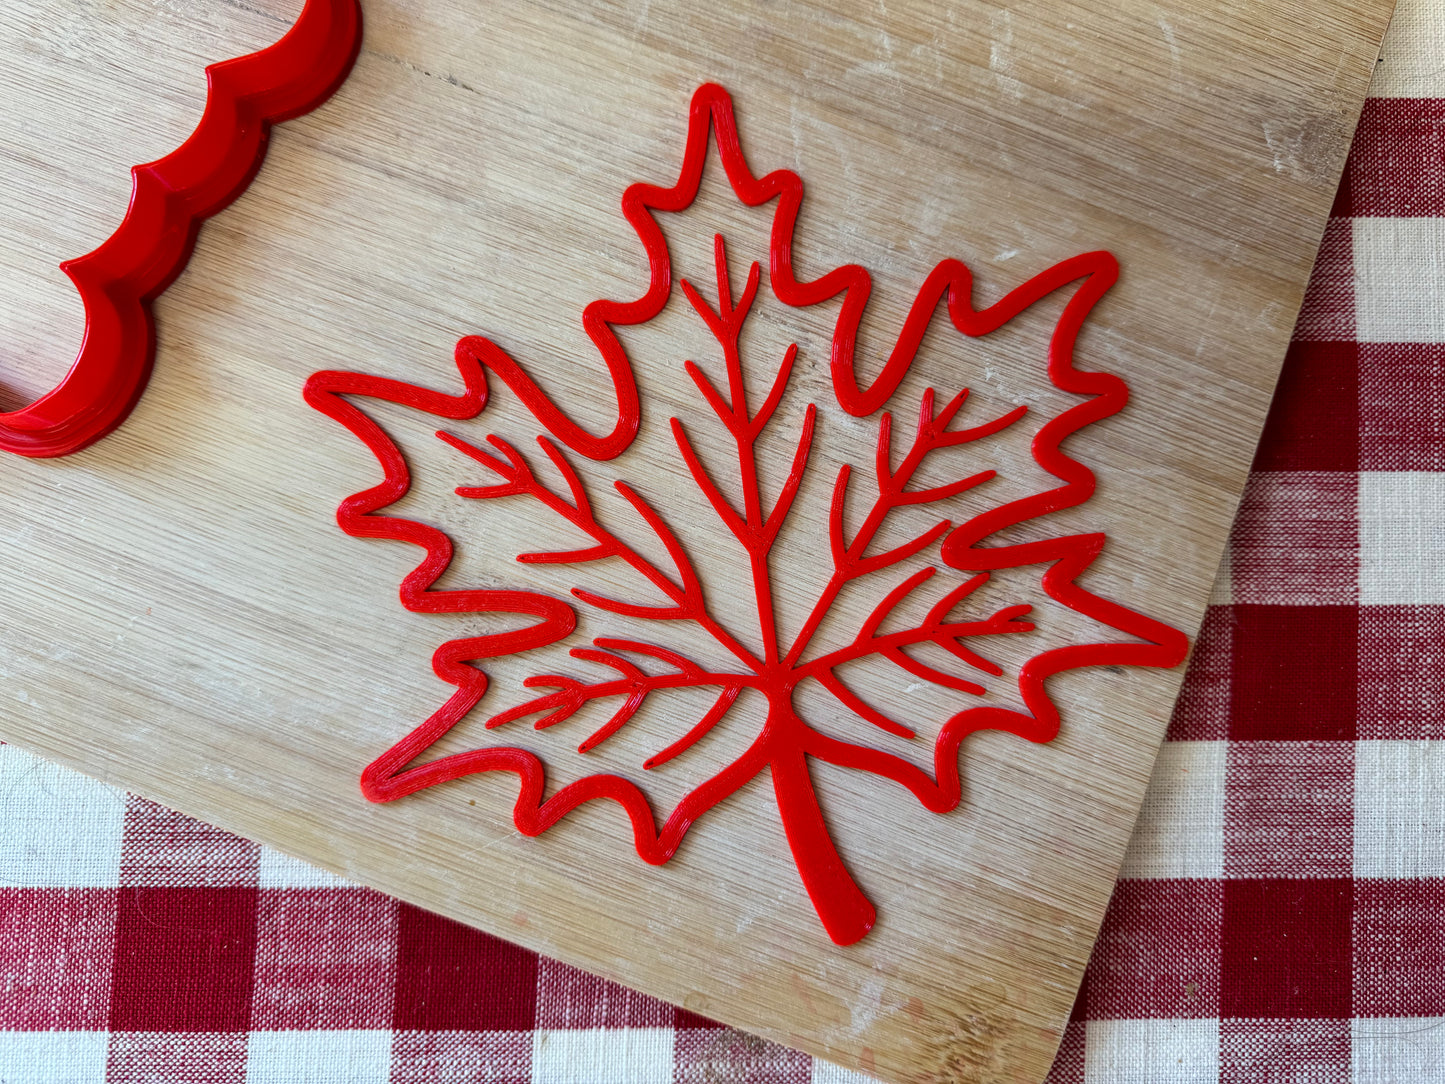 Fall Leaf Design, Pottery Stamp or Stencil w/ optional Cutter, plastic 3d printed, multiple sizes available